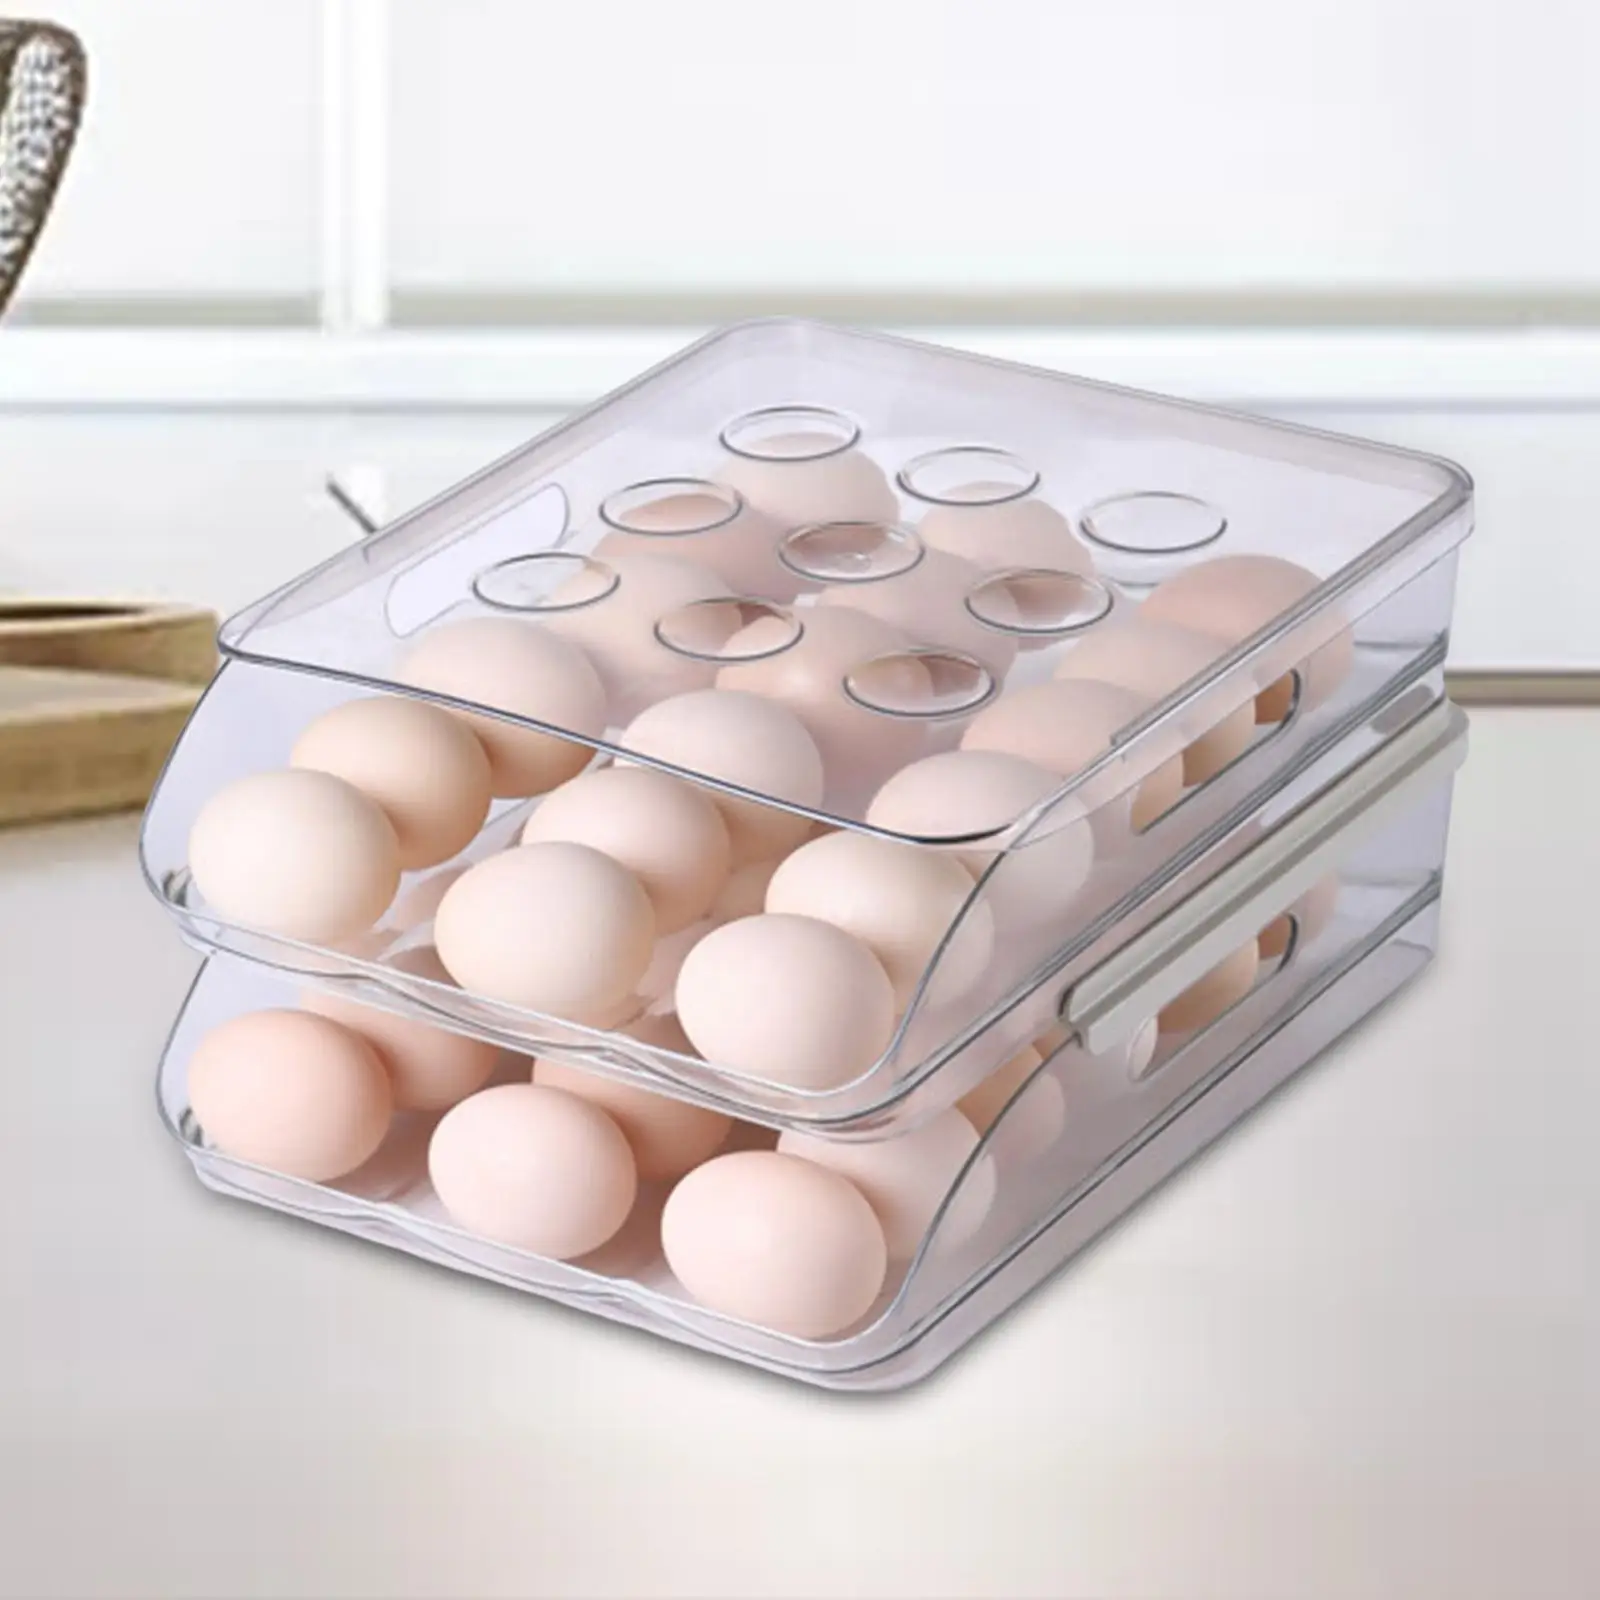 Transparent Egg Box Stackable Egg Container Multi Layer Egg Tray Organizer Bin Auto Rolling for Countertop Drawer Refrigerator